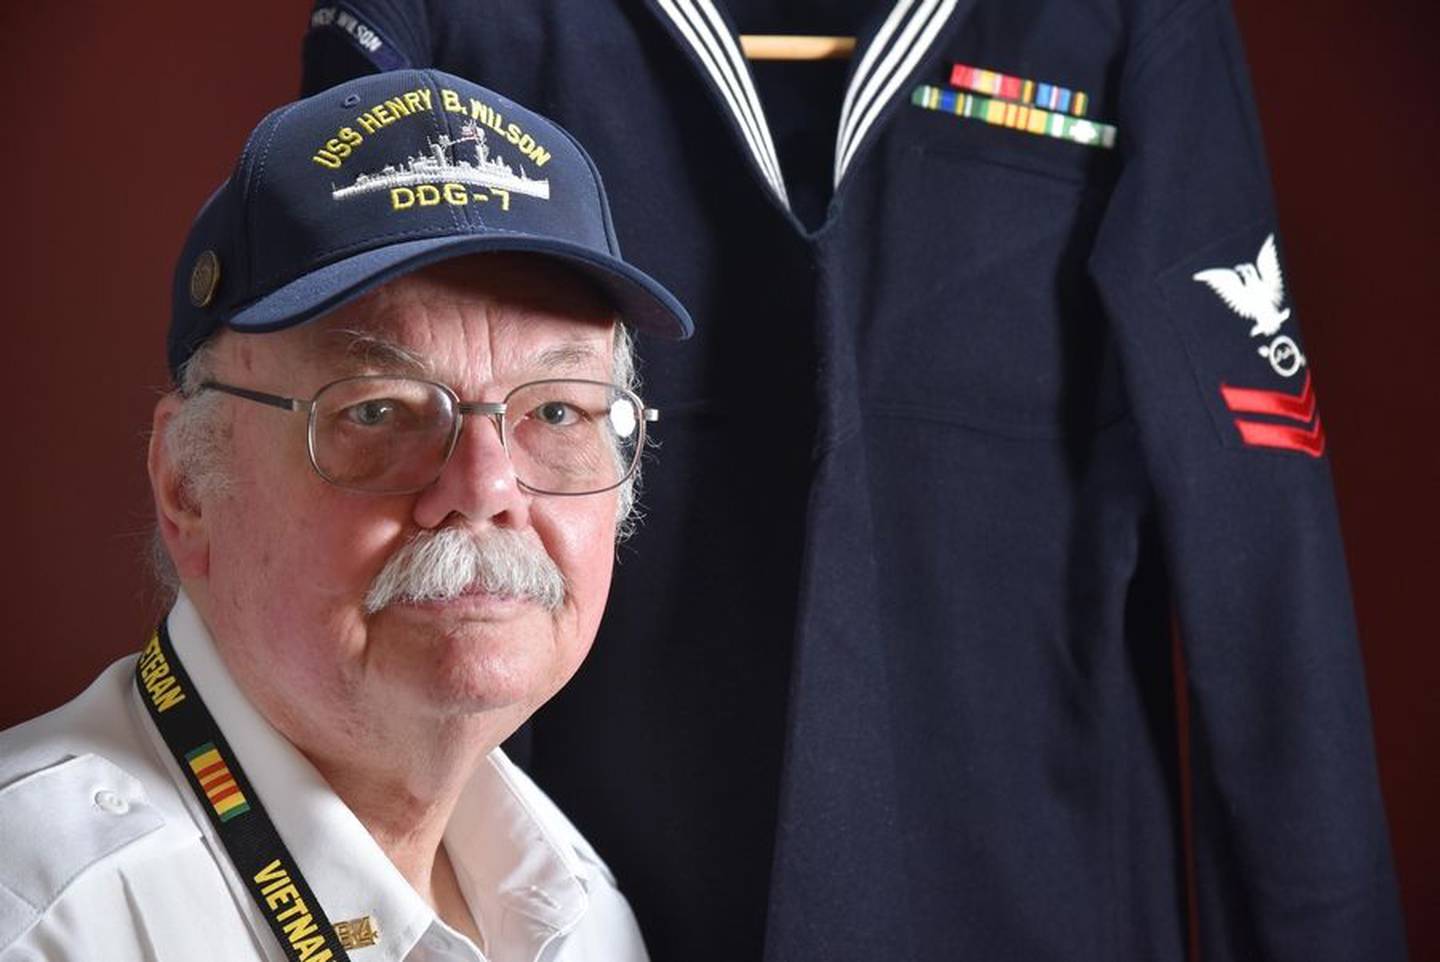 Art Ellingsen of Arlington Heights poses with his Navy uniform. He served aboard the U.S.S. Henry B. Wilson before the ship's involvement in the final battle of the Vietnam War and has since become a historian of both the battle and his old ship.